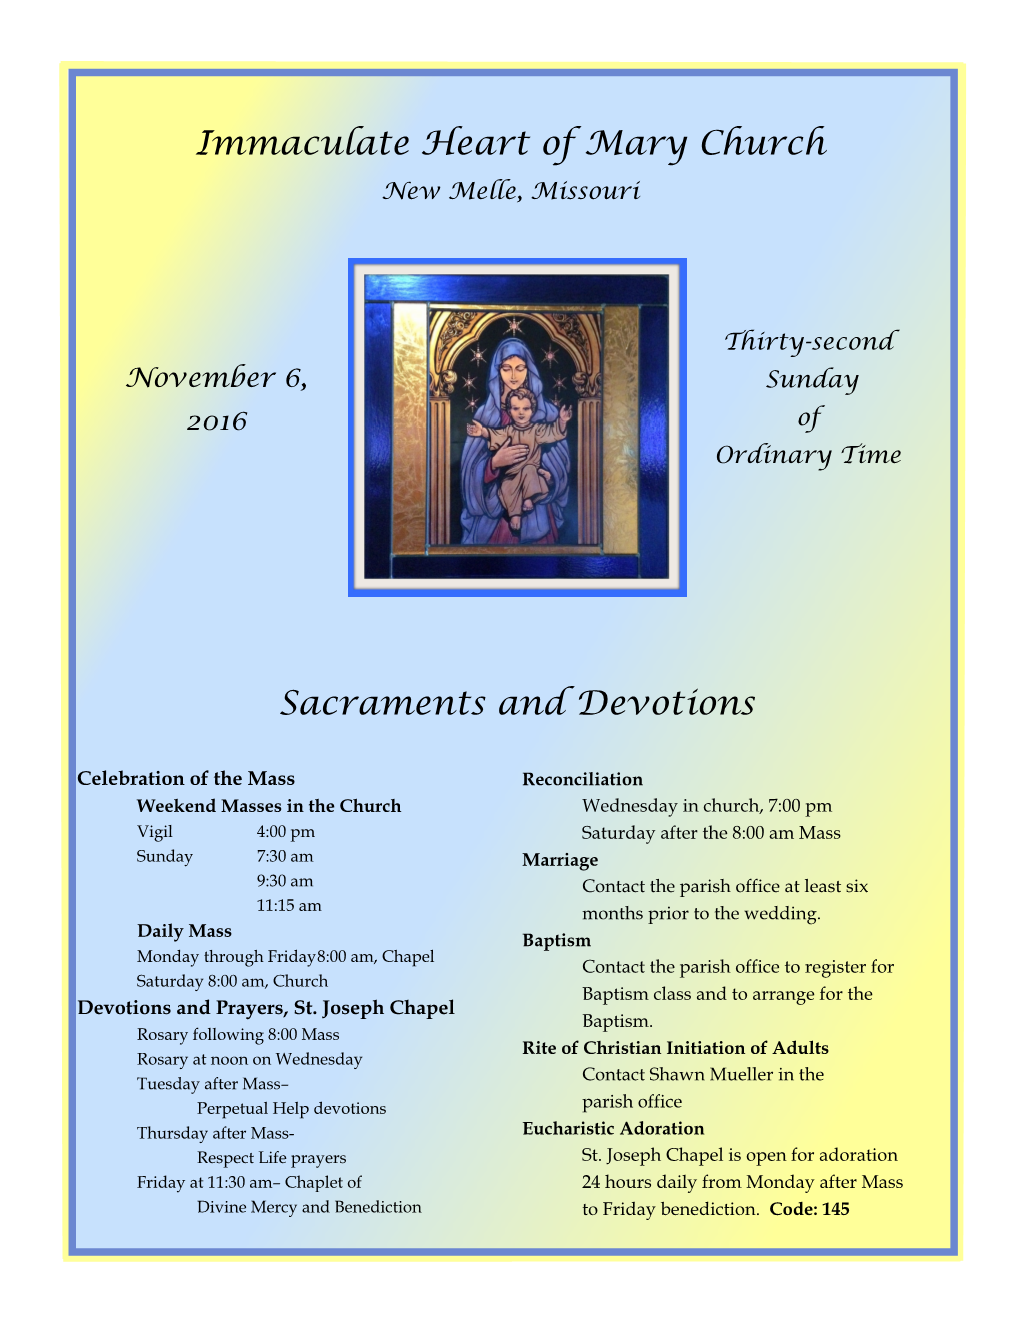 Immaculate Heart of Mary Church Sacraments and Devotions